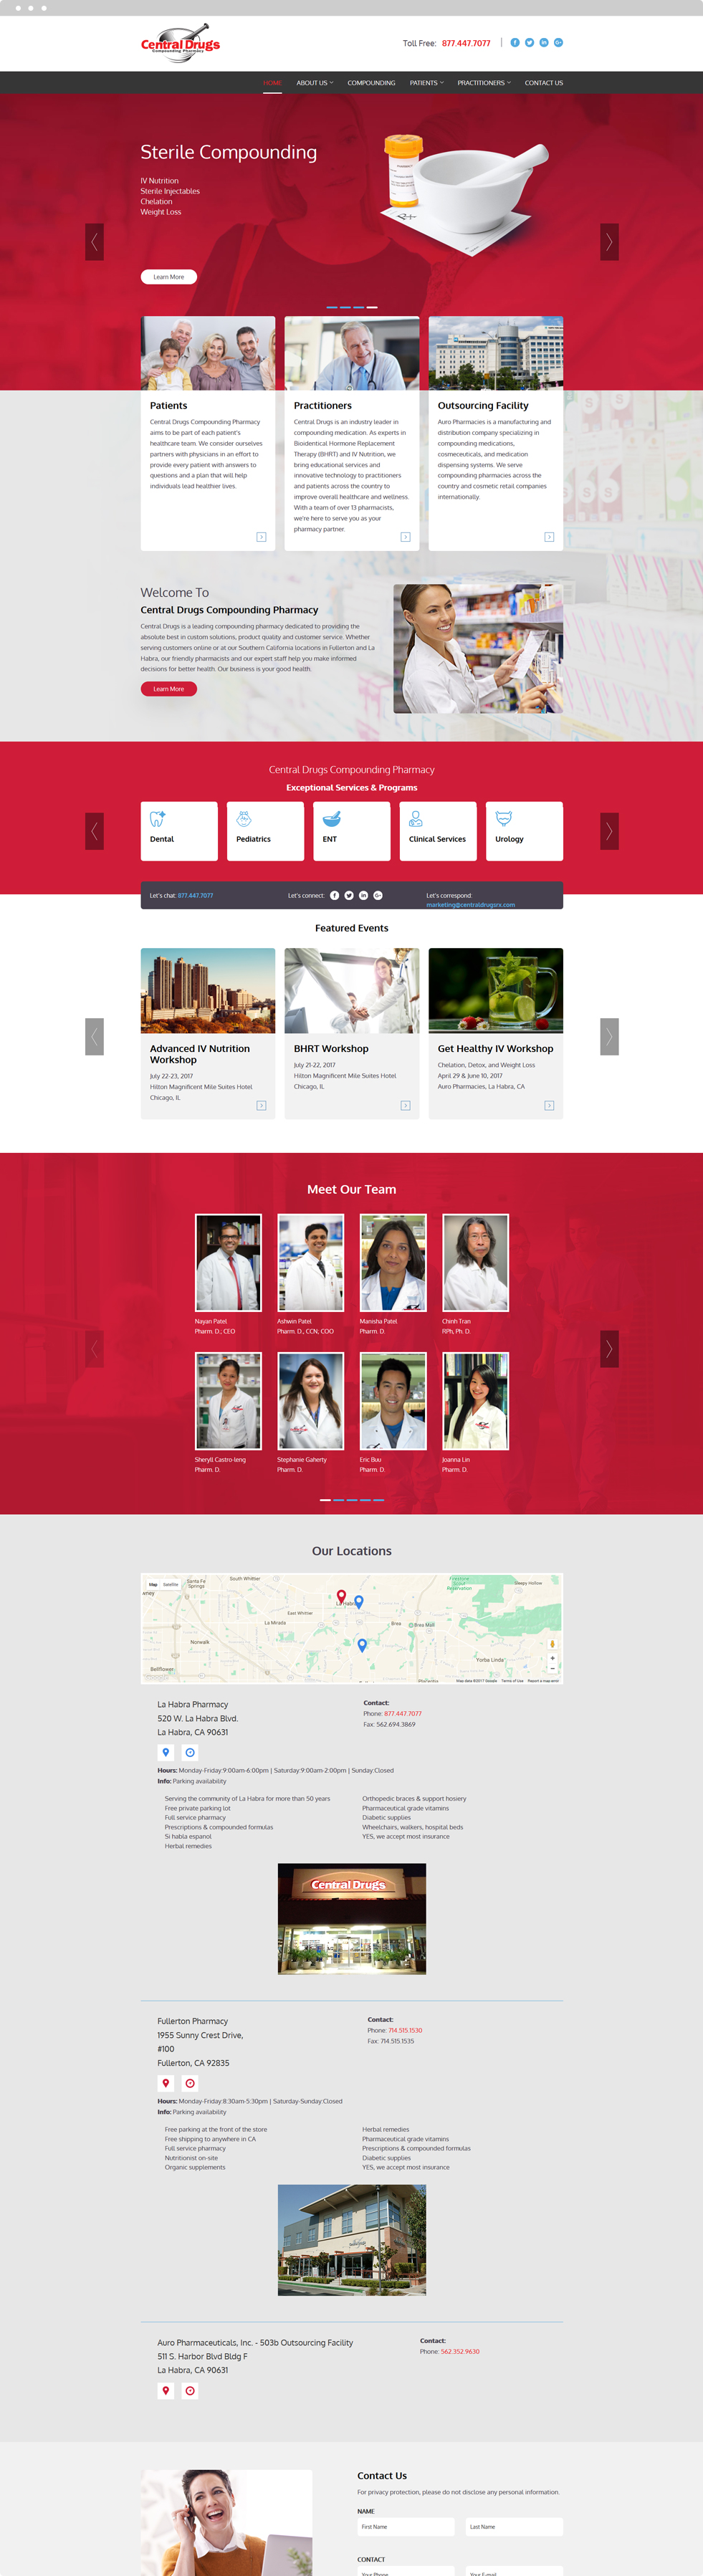 Pharmacies Website Design - Central Drugs Compounding Pharmacy - Homepage